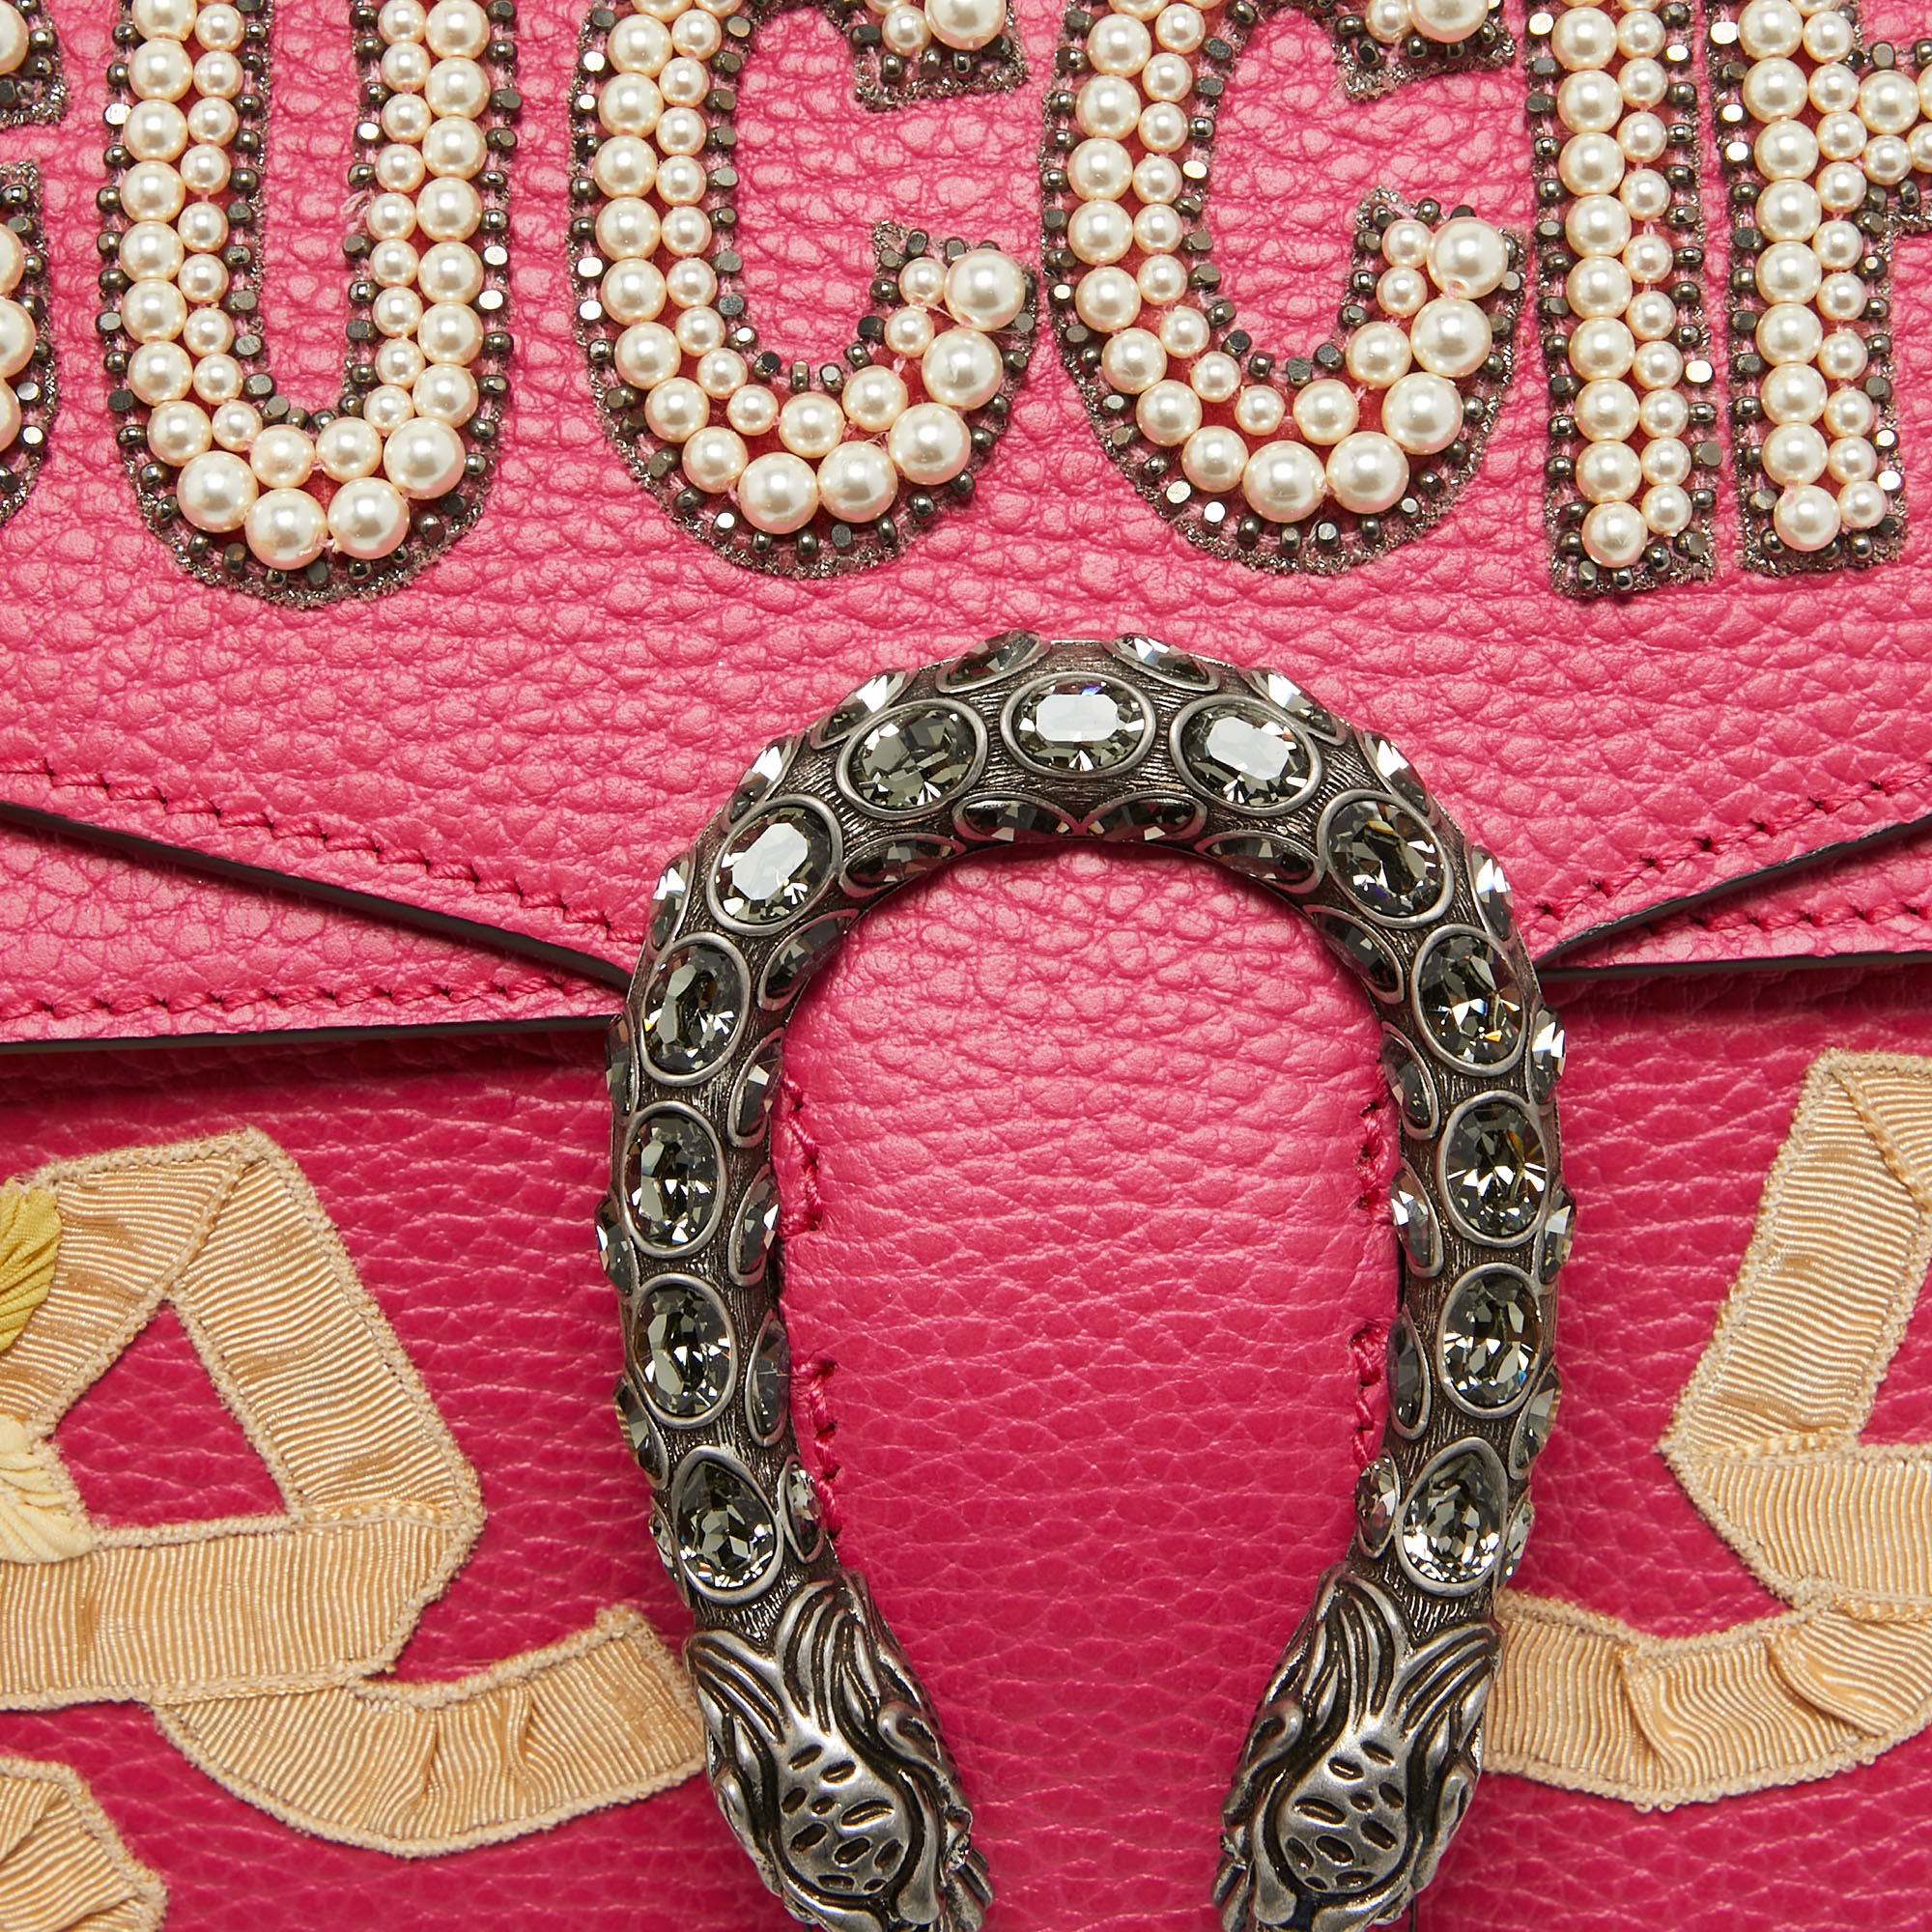 Gucci Magenta Leather Small Guccify Pearl Embellished Dionysus Shoulder Bag